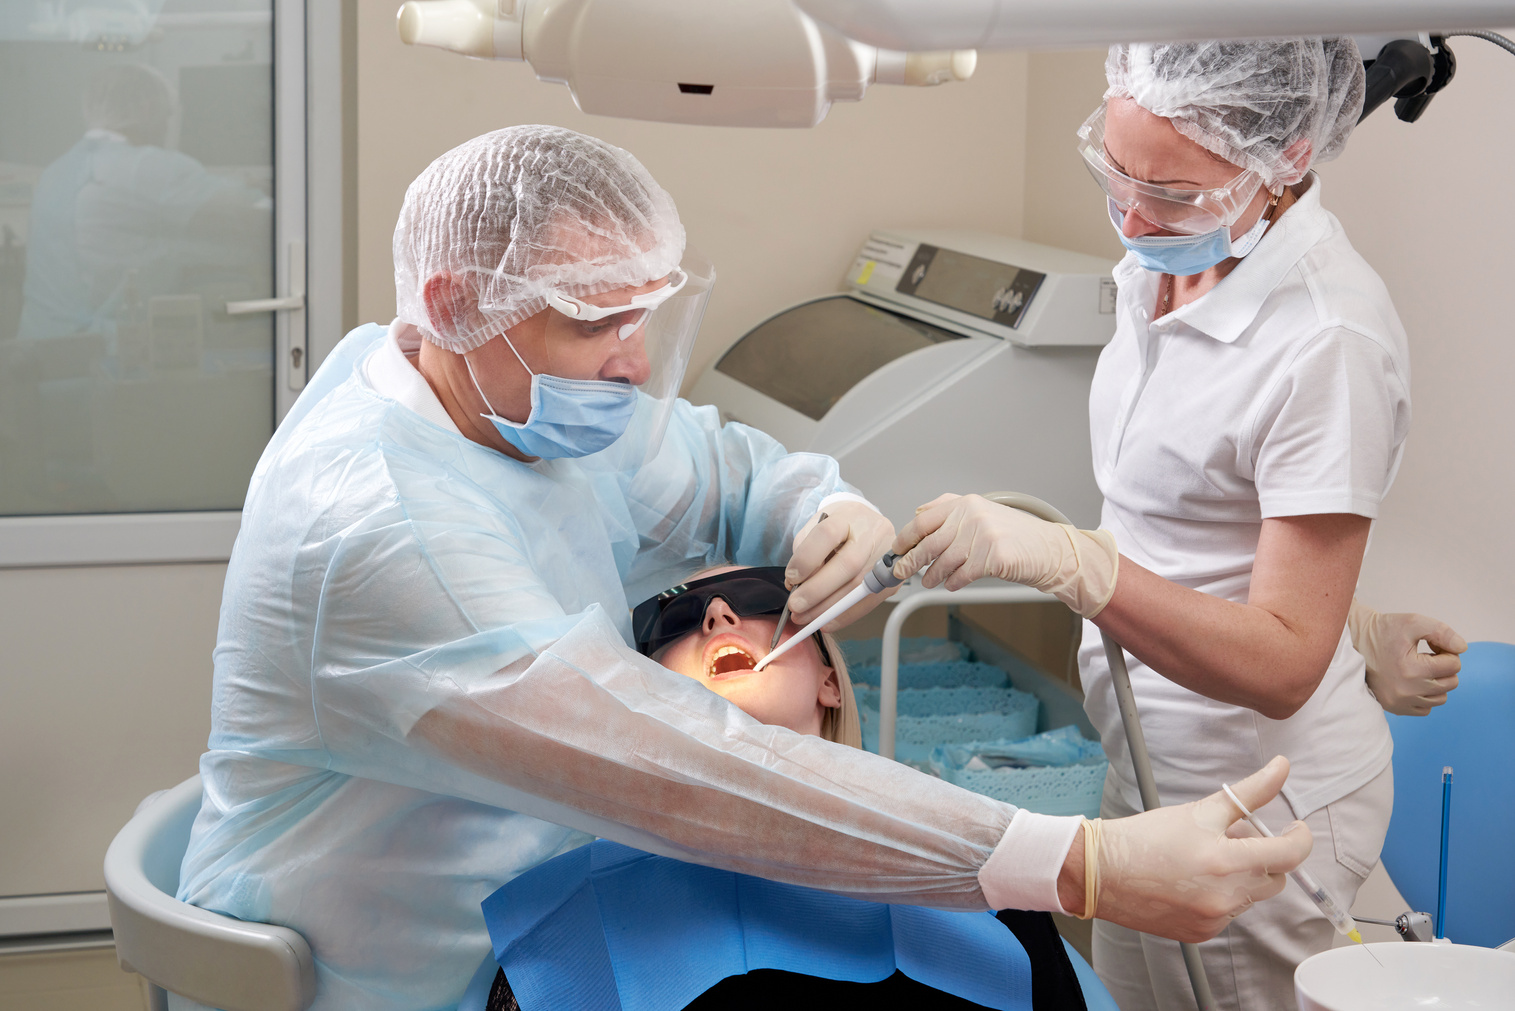 Dentist making local anesthesia shot before surgery.